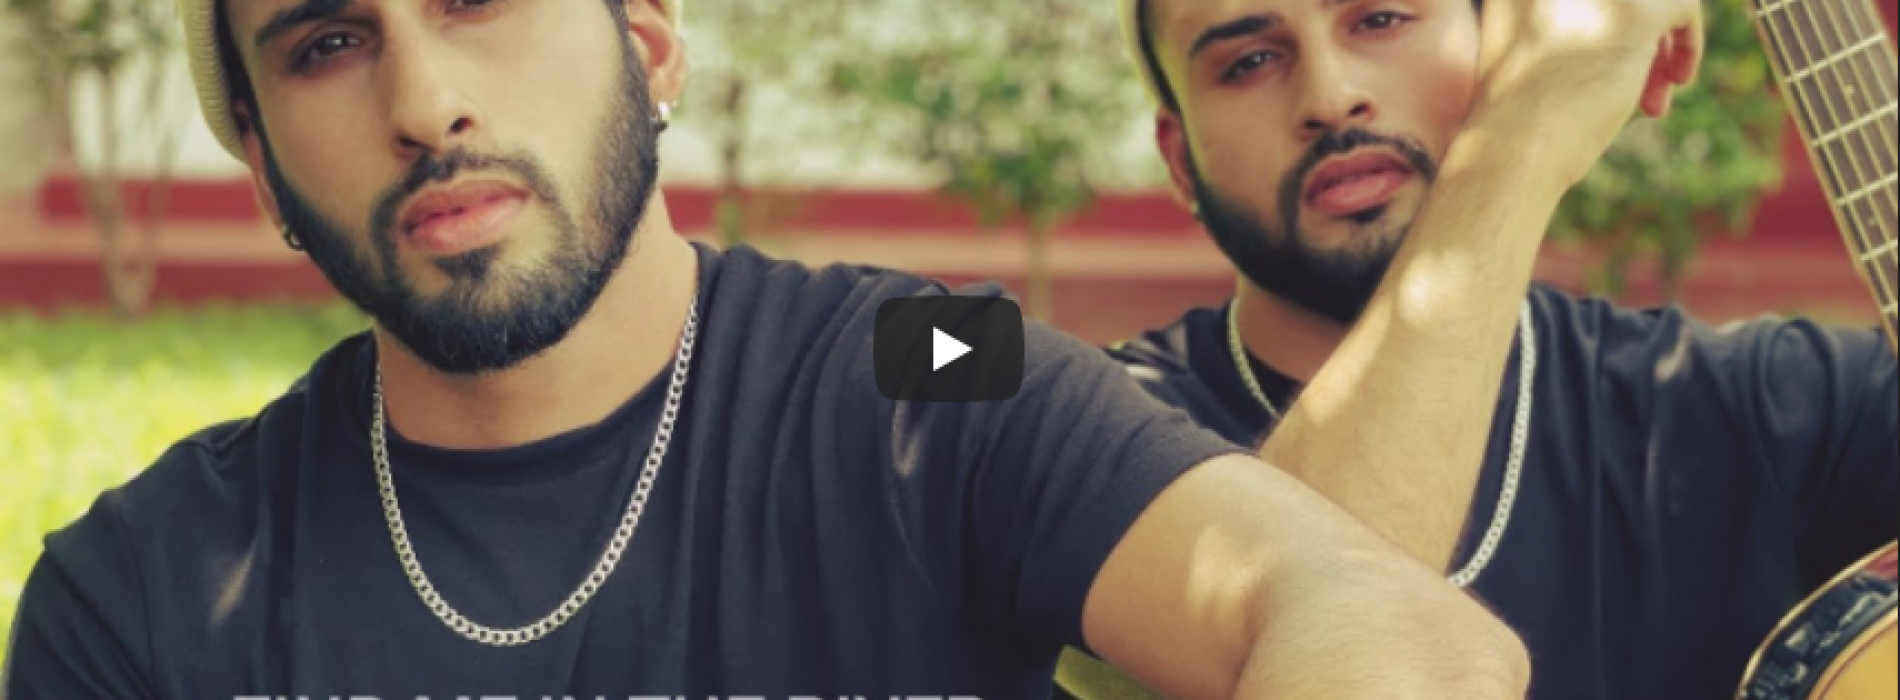 New Music : JJ Twins – Find Me In The River (Music Video)